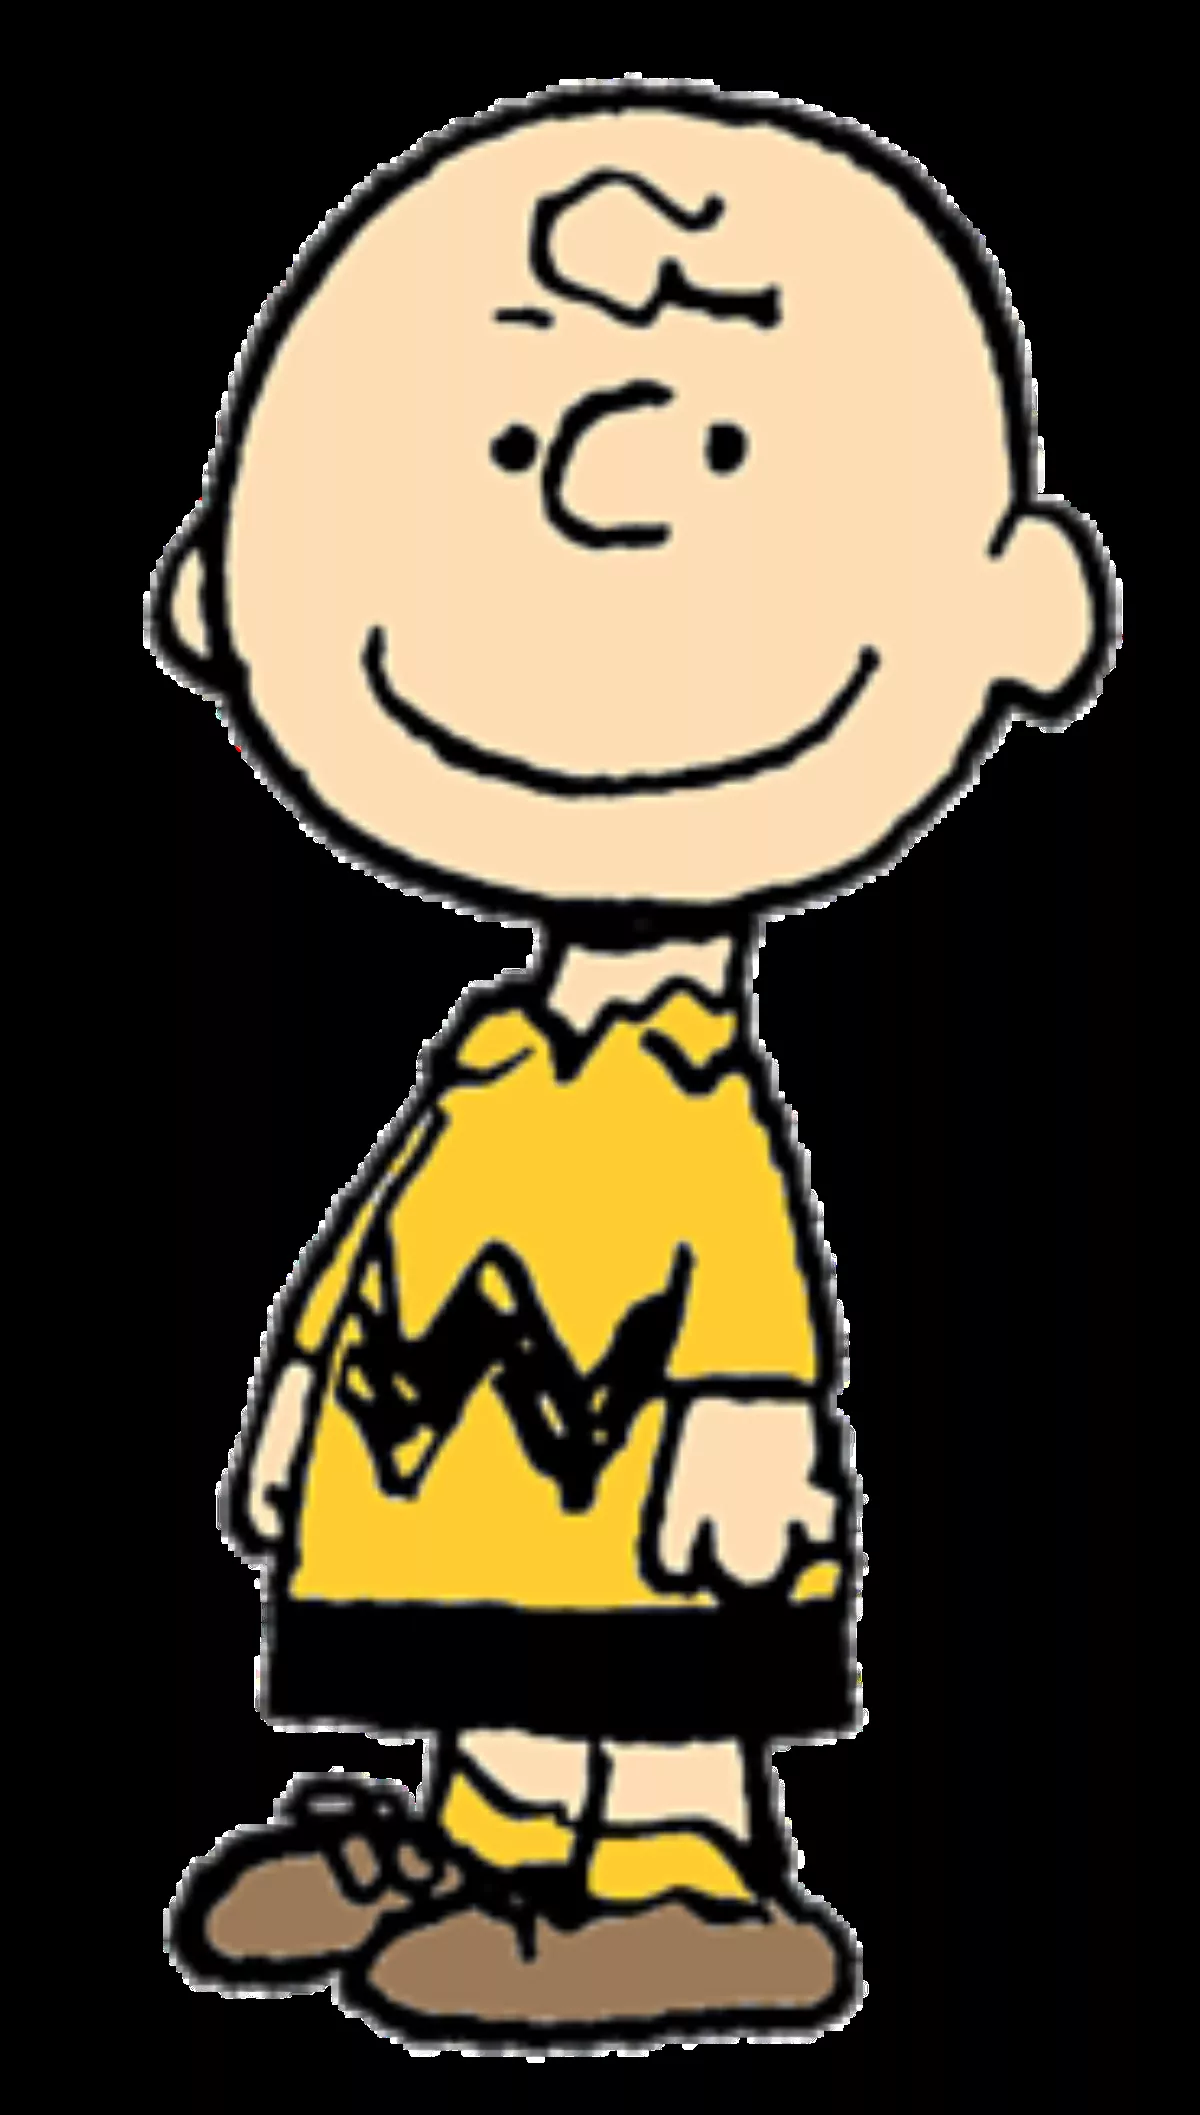 18 Facts About Charlie Brown | FactSnippet